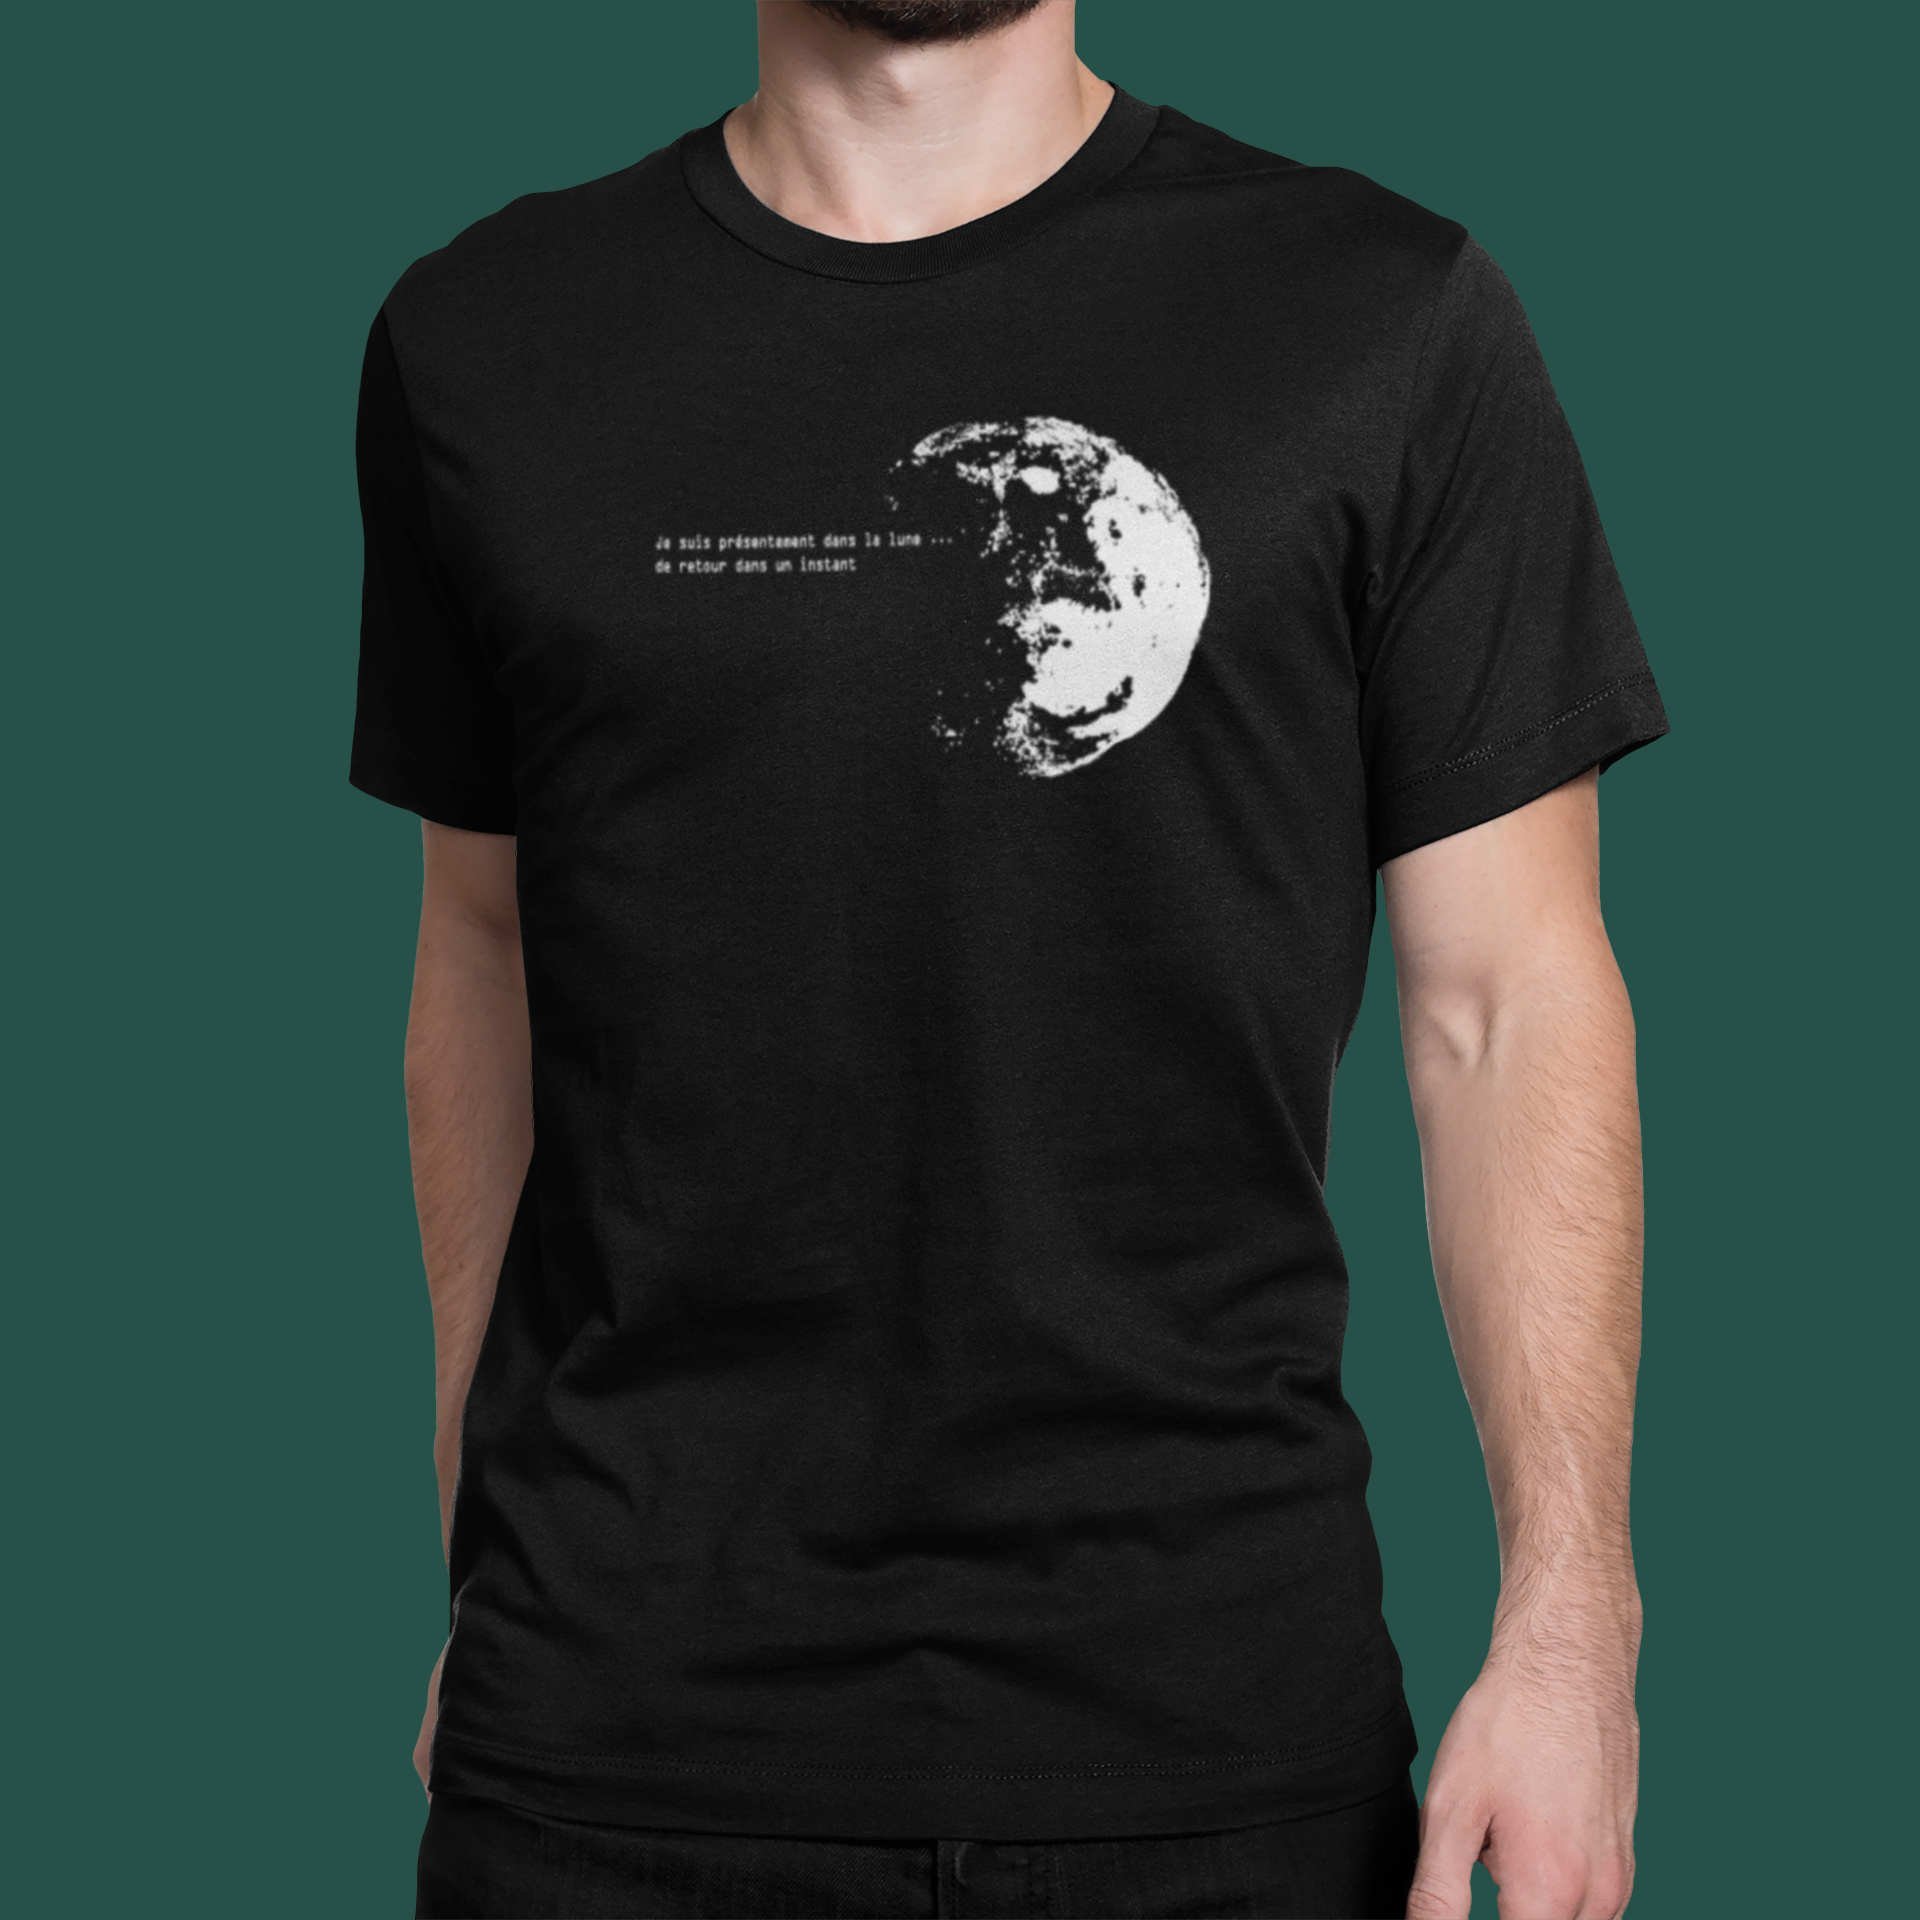 In the moon -T-shirt- Unisex